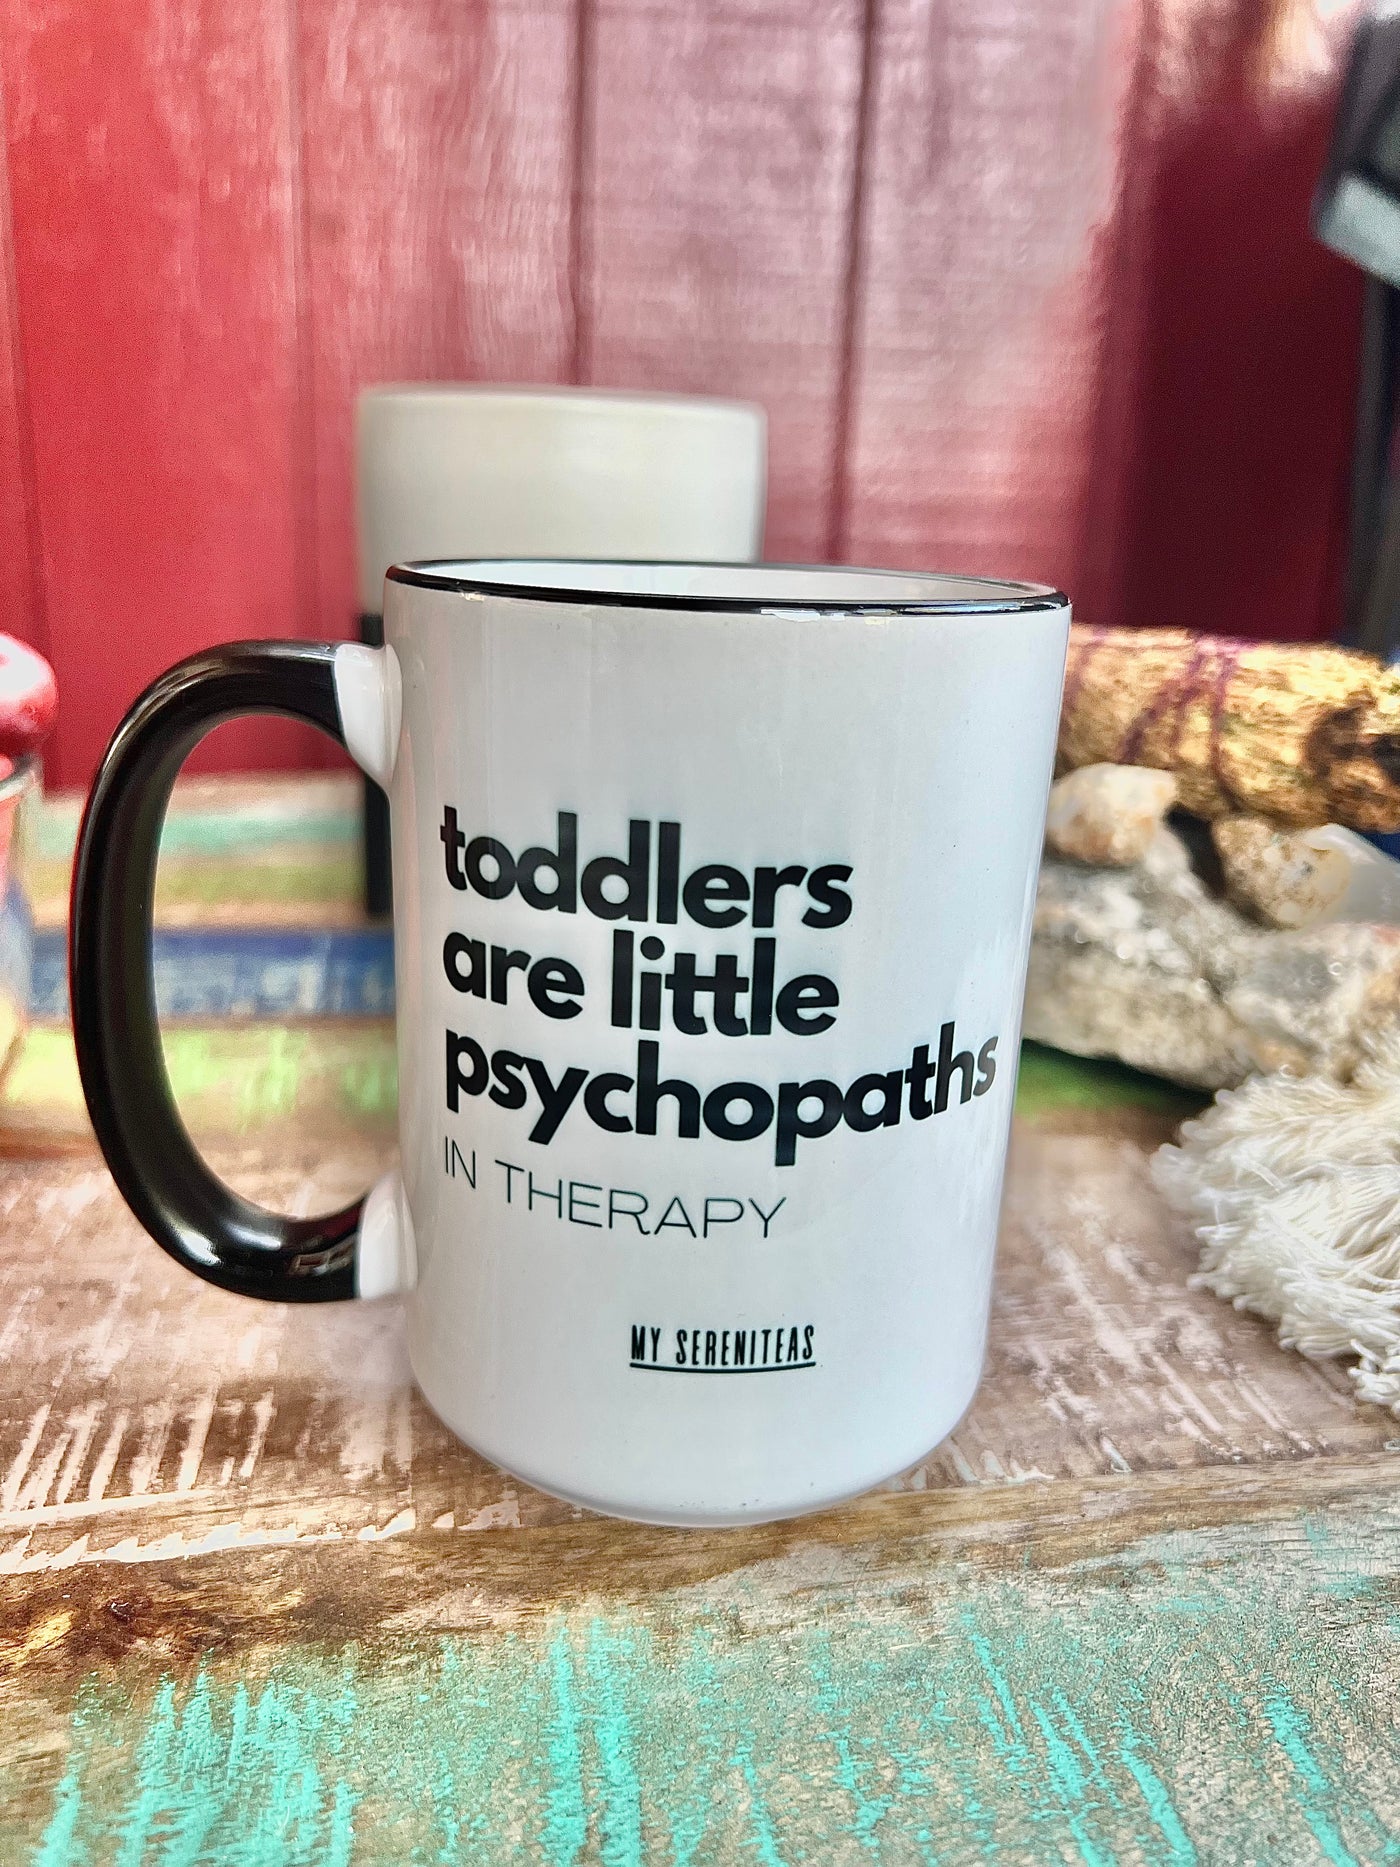 Toddlers are Psychopaths